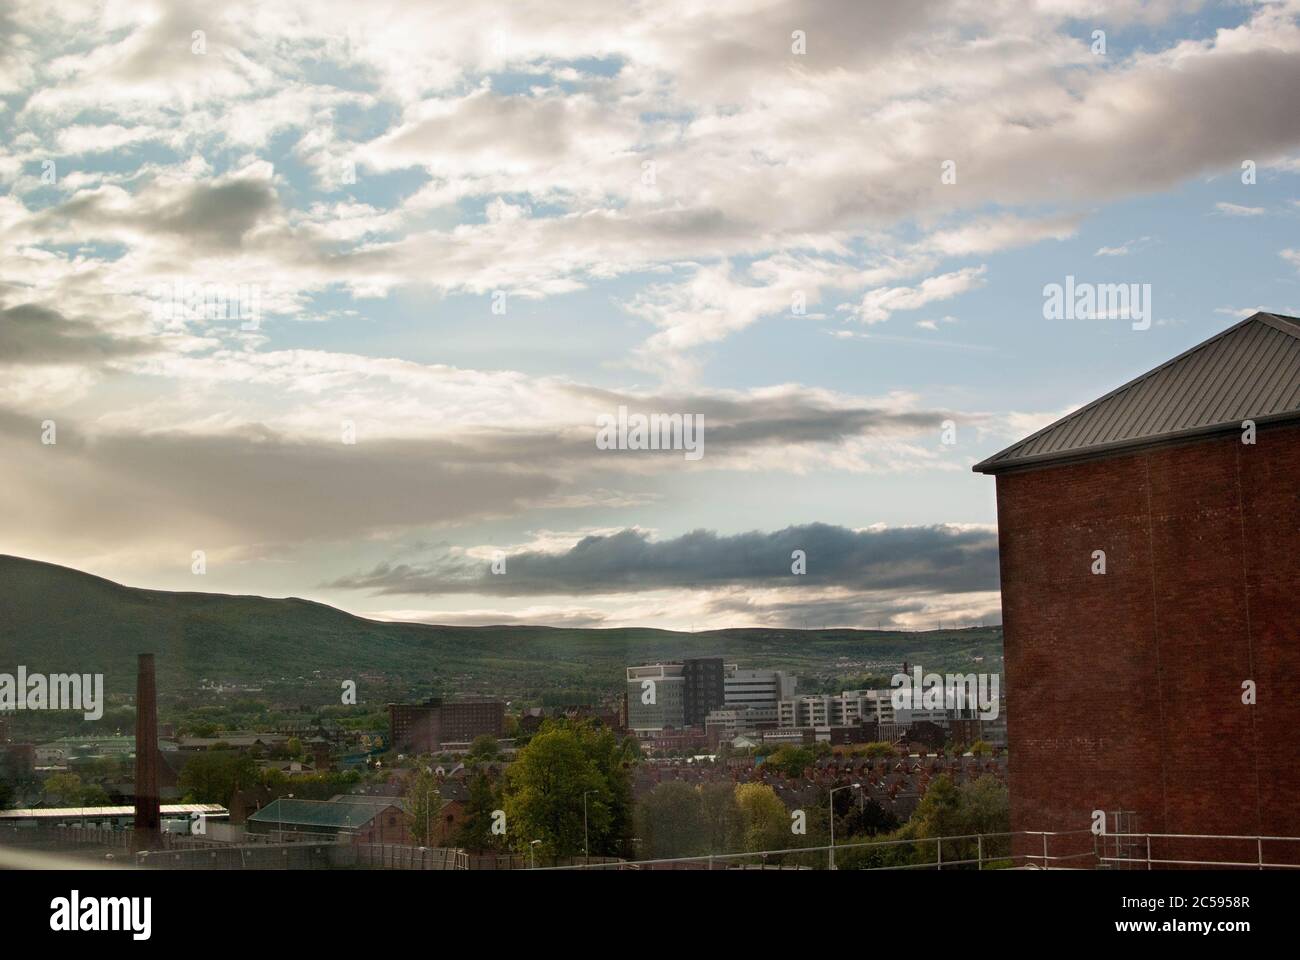 Belfast view from the top of a building Stock Photo